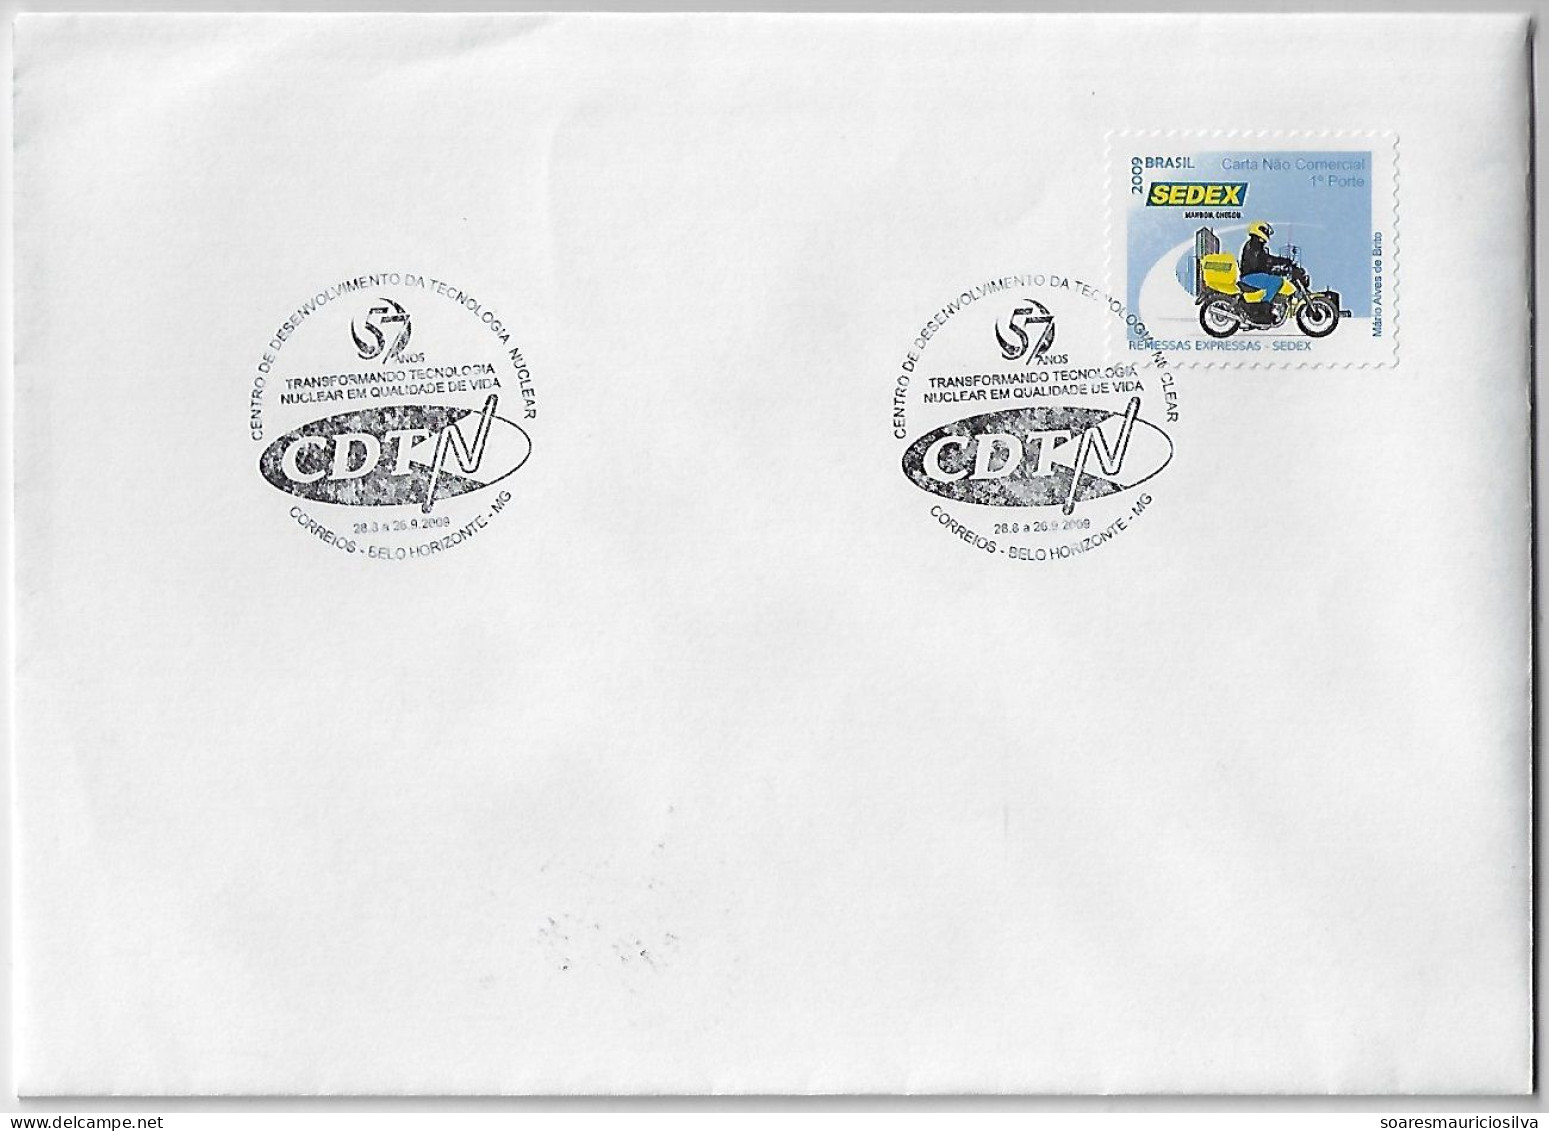 Brazil 2009 Cover Commemorative Cancel 57 Years Center For The Development Of Nuclear Technology CDTN Belo Horizonte - Atomenergie